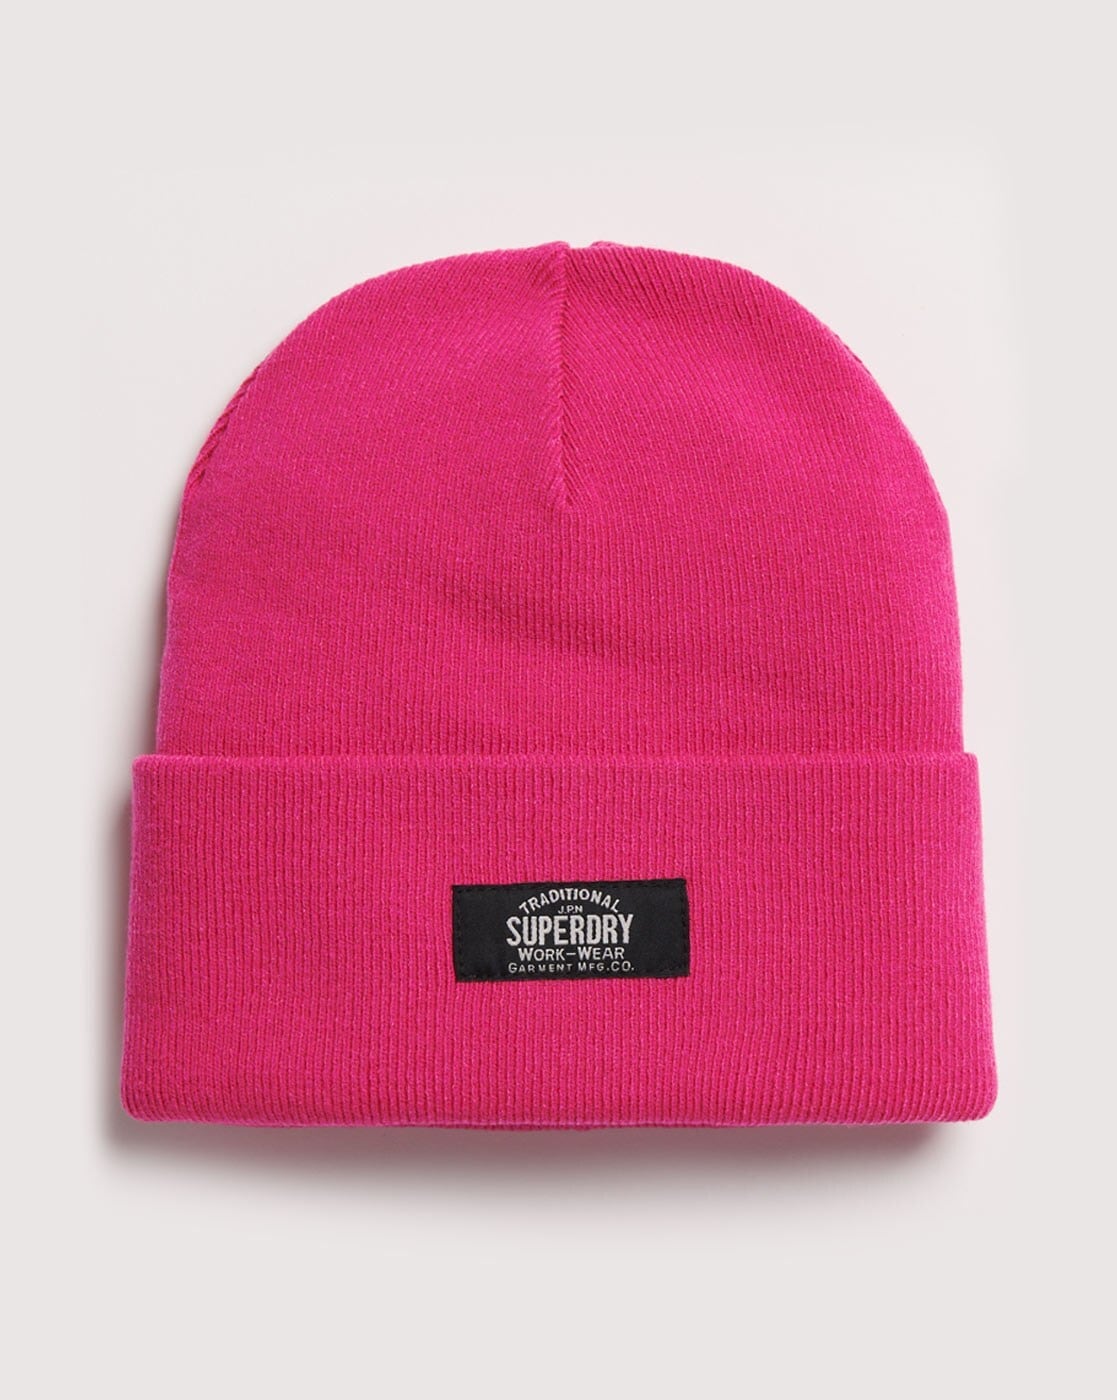 Buy Pink Caps Hats SUPERDRY Online Men & by for